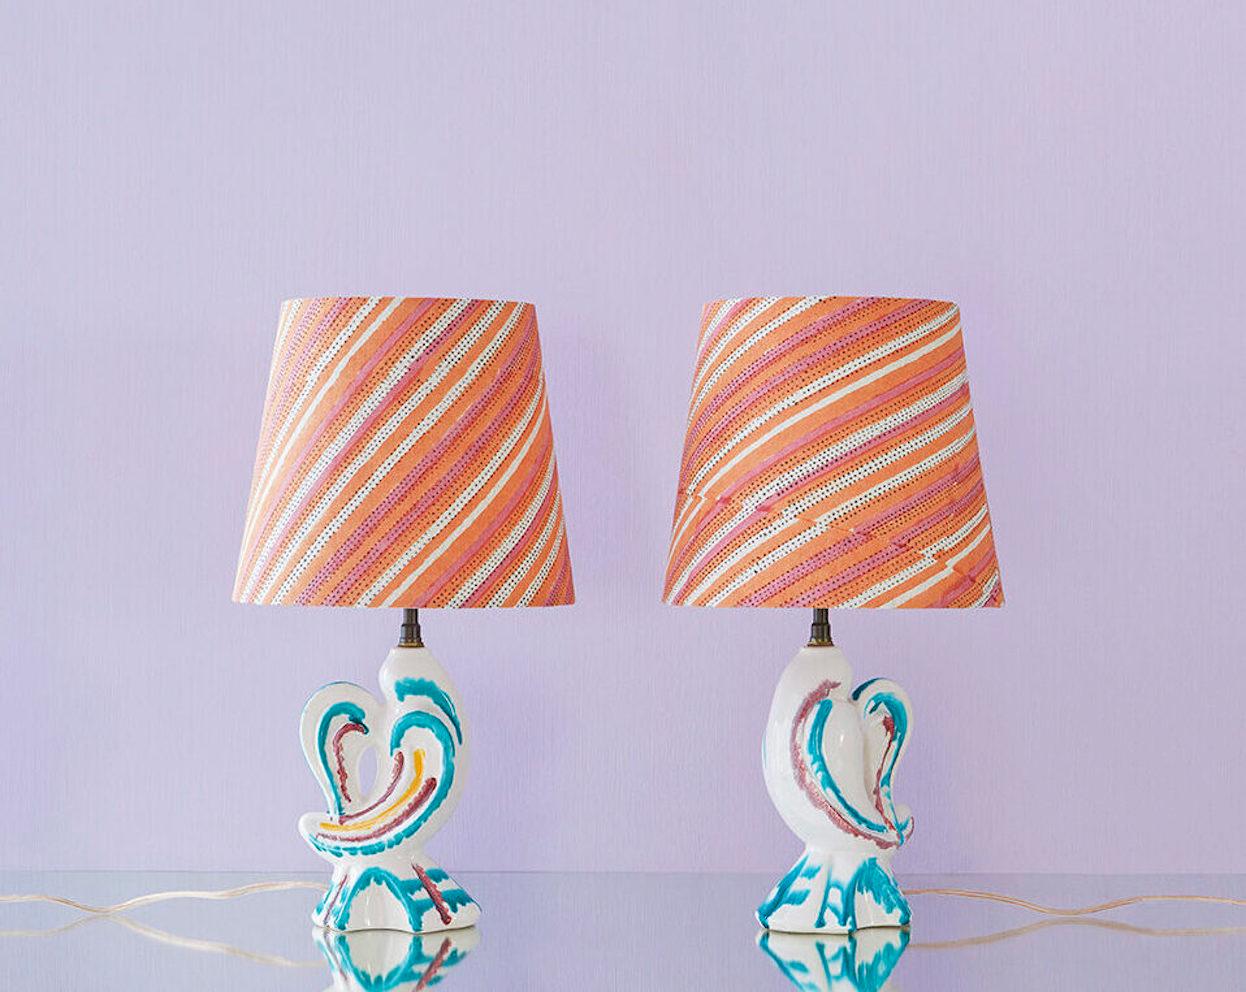 France, 1950's

A pair of zoomorphic ceramic table lamps with multicolored glaze and customised shade by The Apartment.

Measures: H 39.5 x Ø 22 cm.